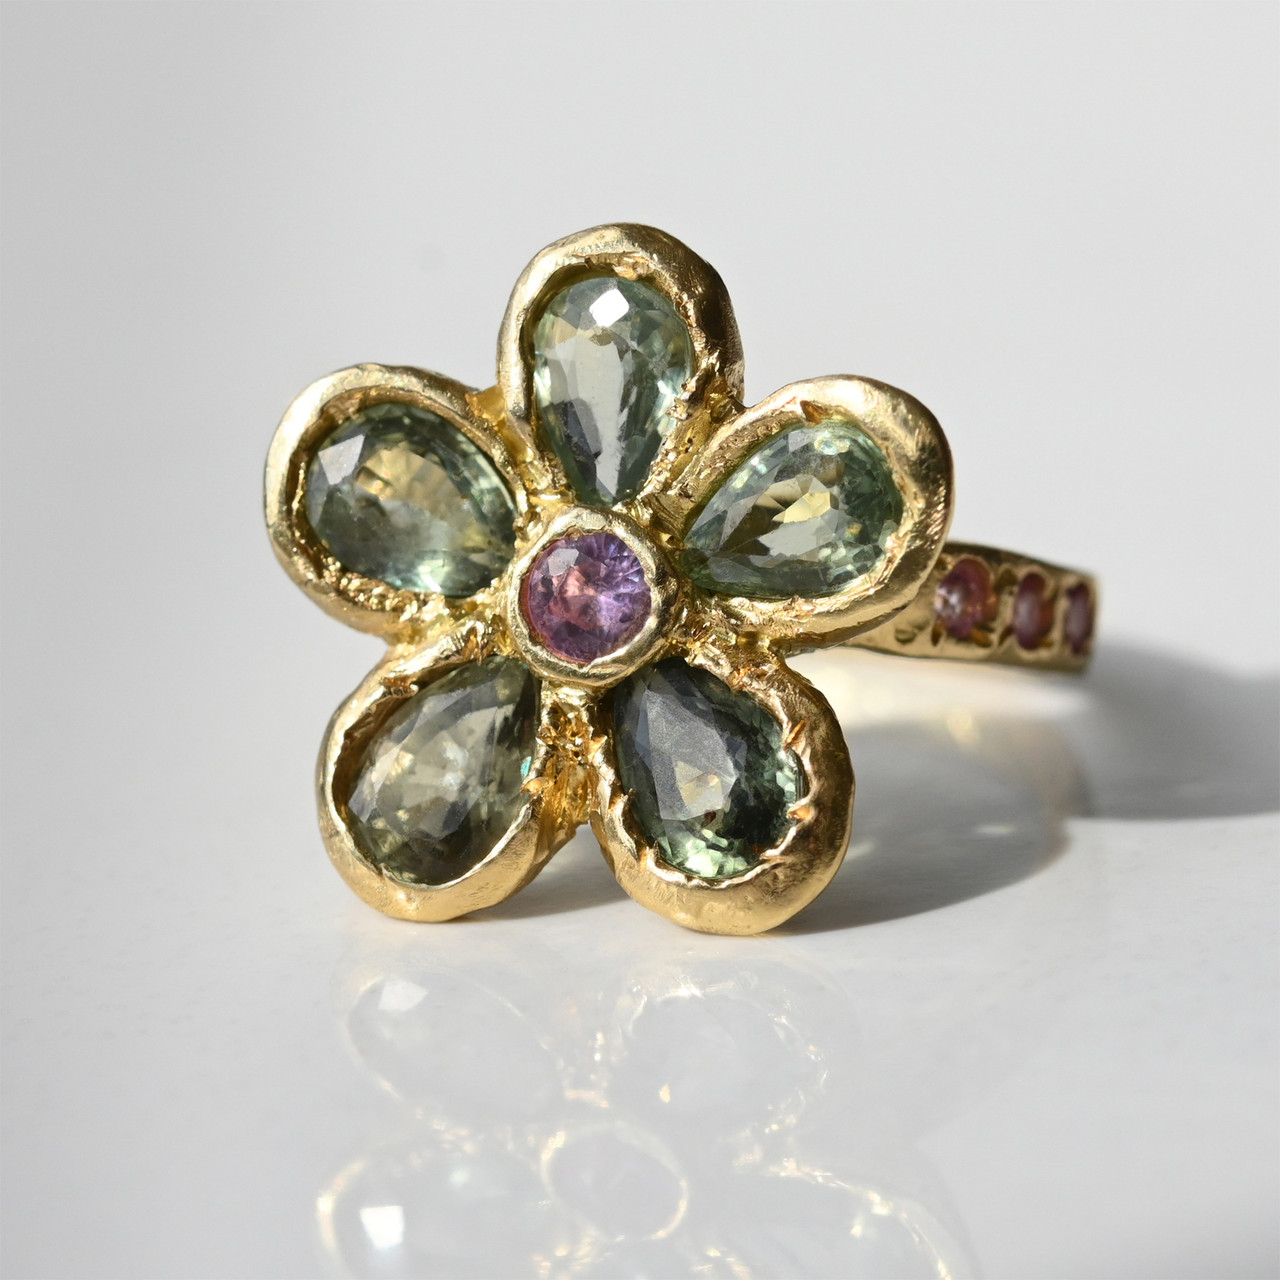 One-Of-A-Kind Sapphire Blossom Flower Ring, Leto Lama, tomfoolery